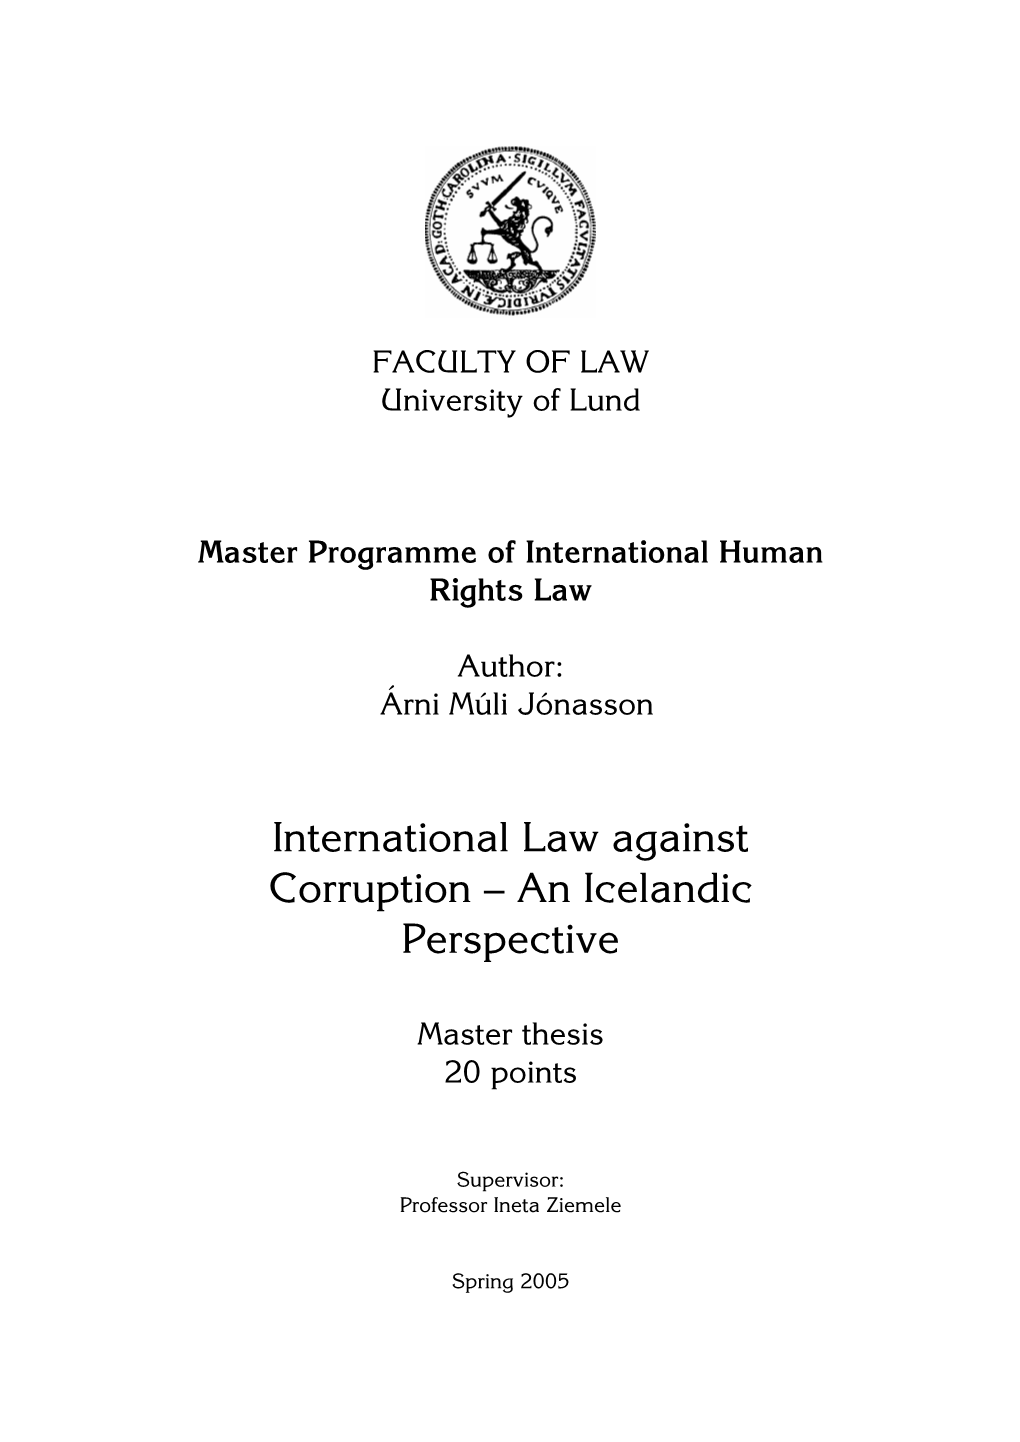 International Law Against Corruption – an Icelandic Perspective